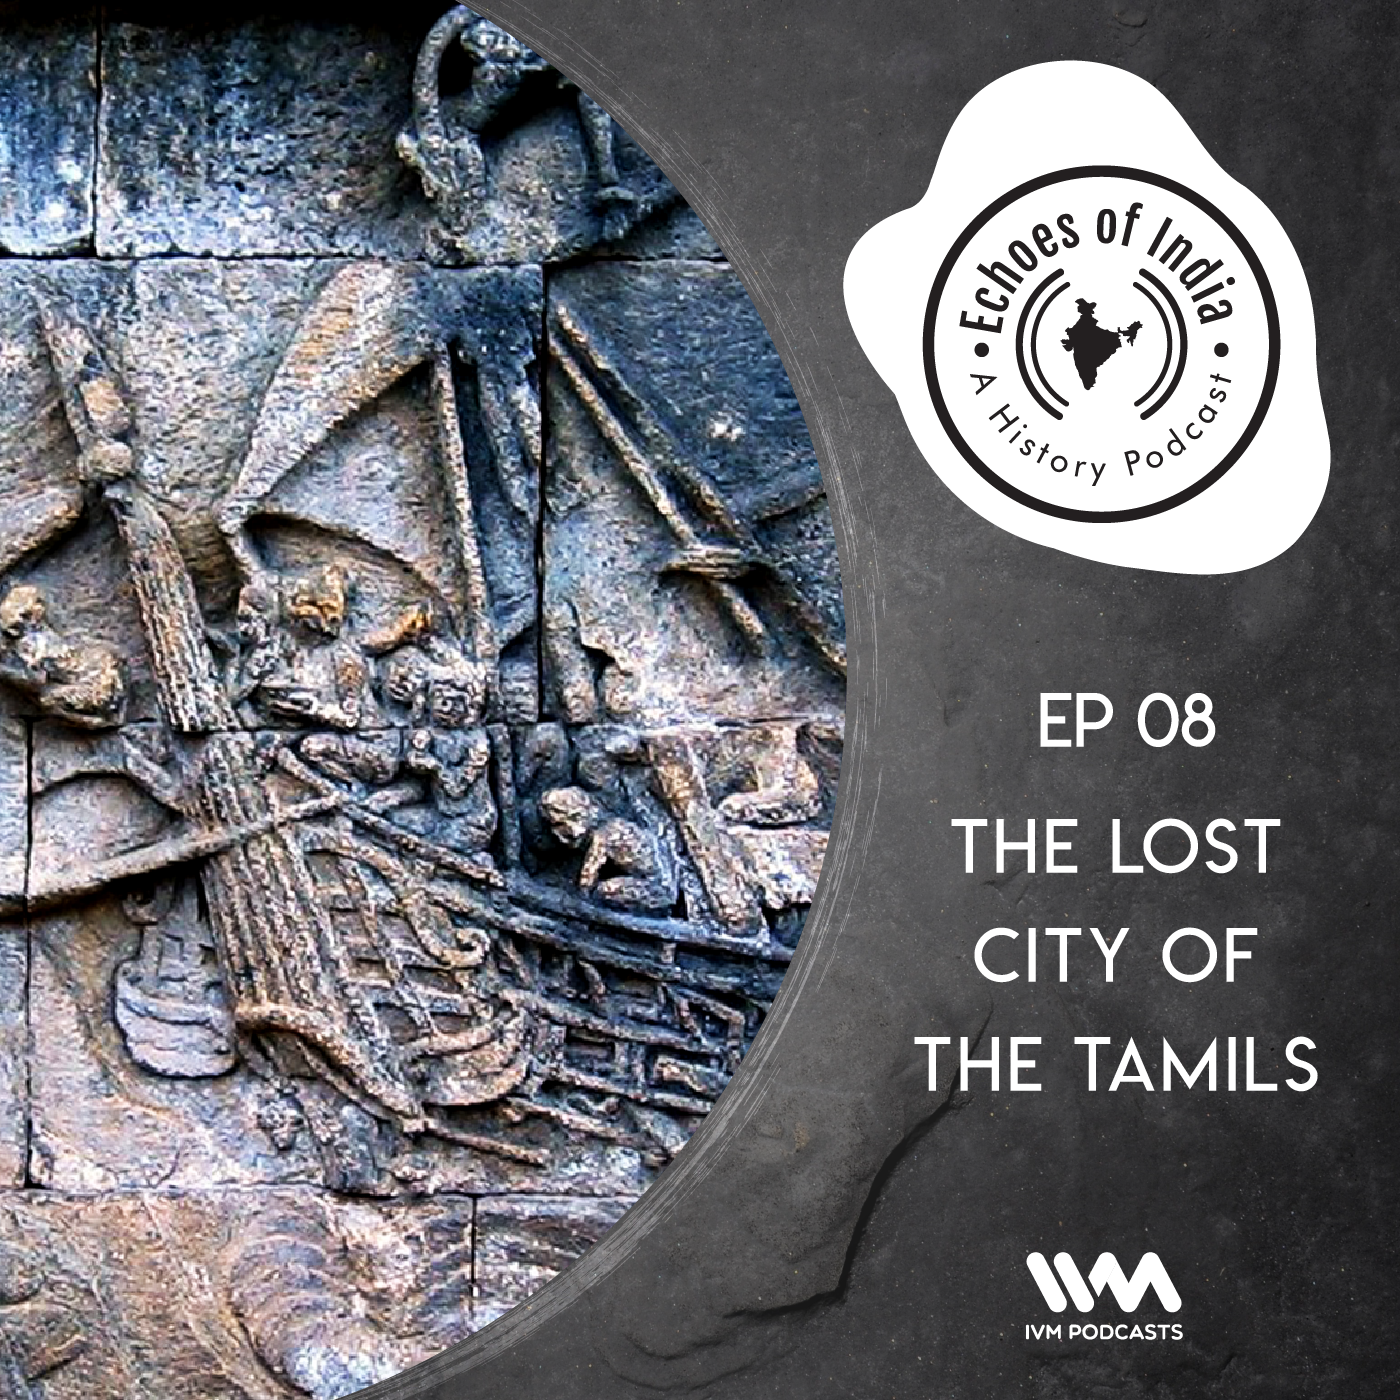 The Lost City of the Tamils